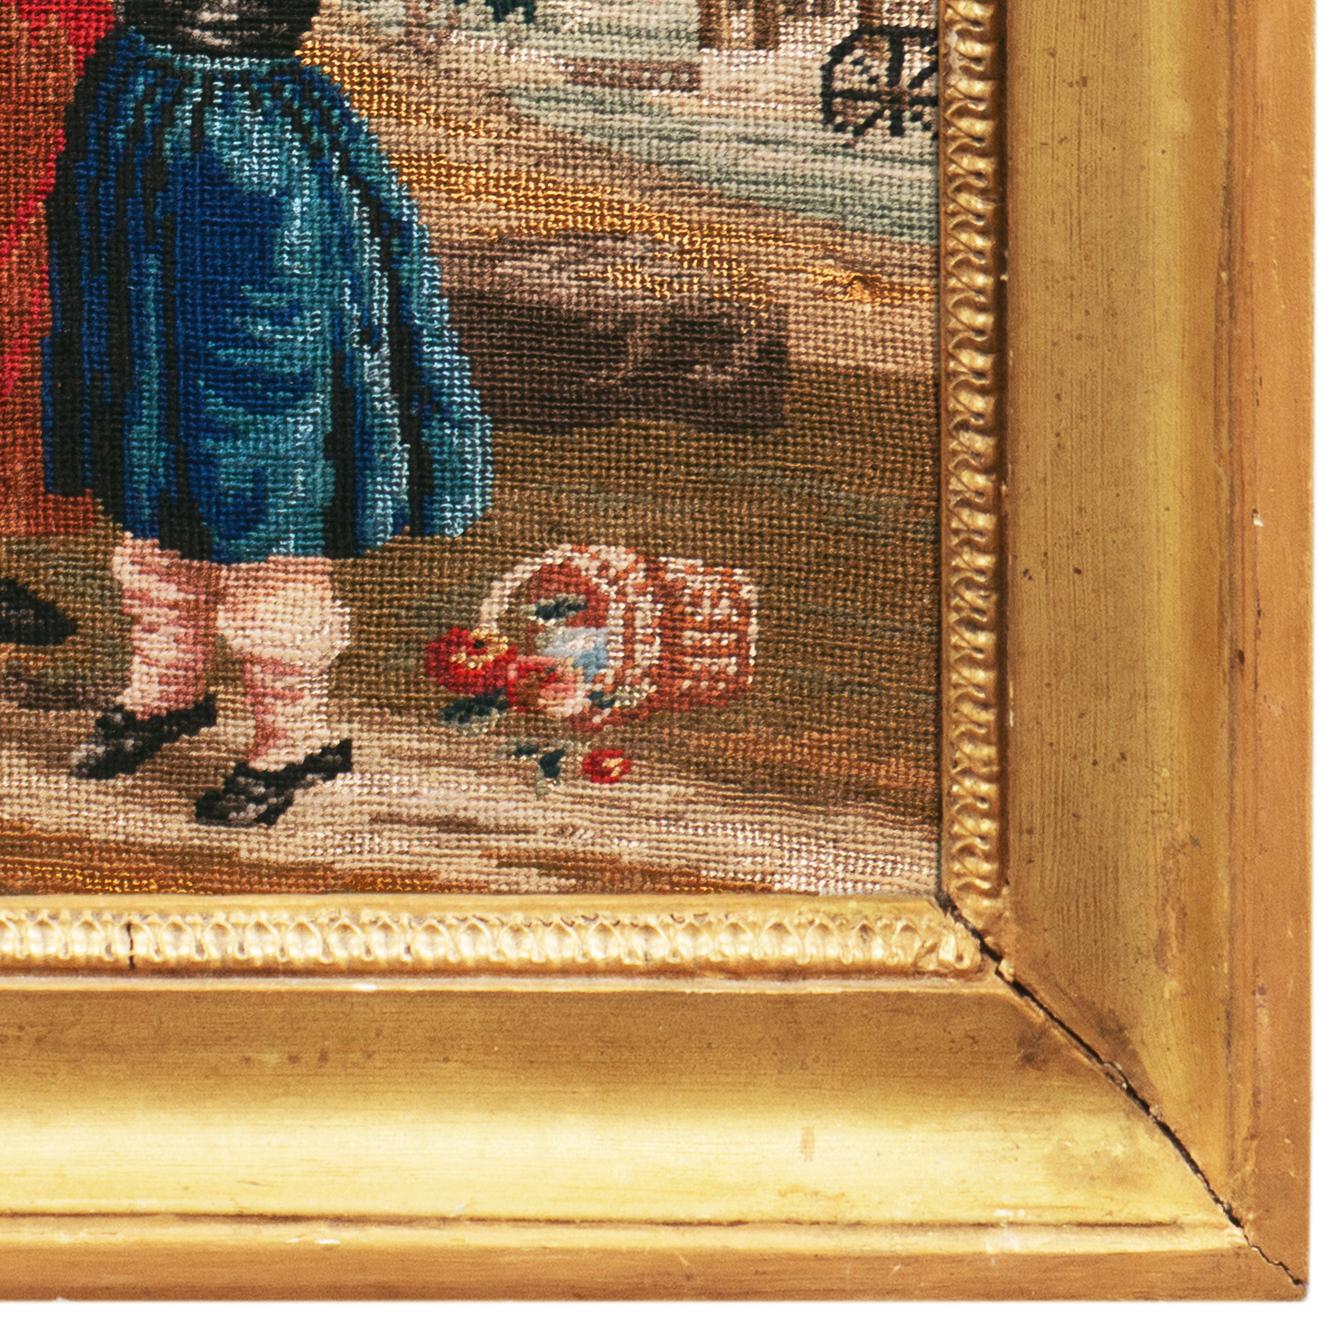 „The Lowered Bough“, Figural Petit-point, Nadelspitze, Mutter, Tochter, Ernte im Angebot 8